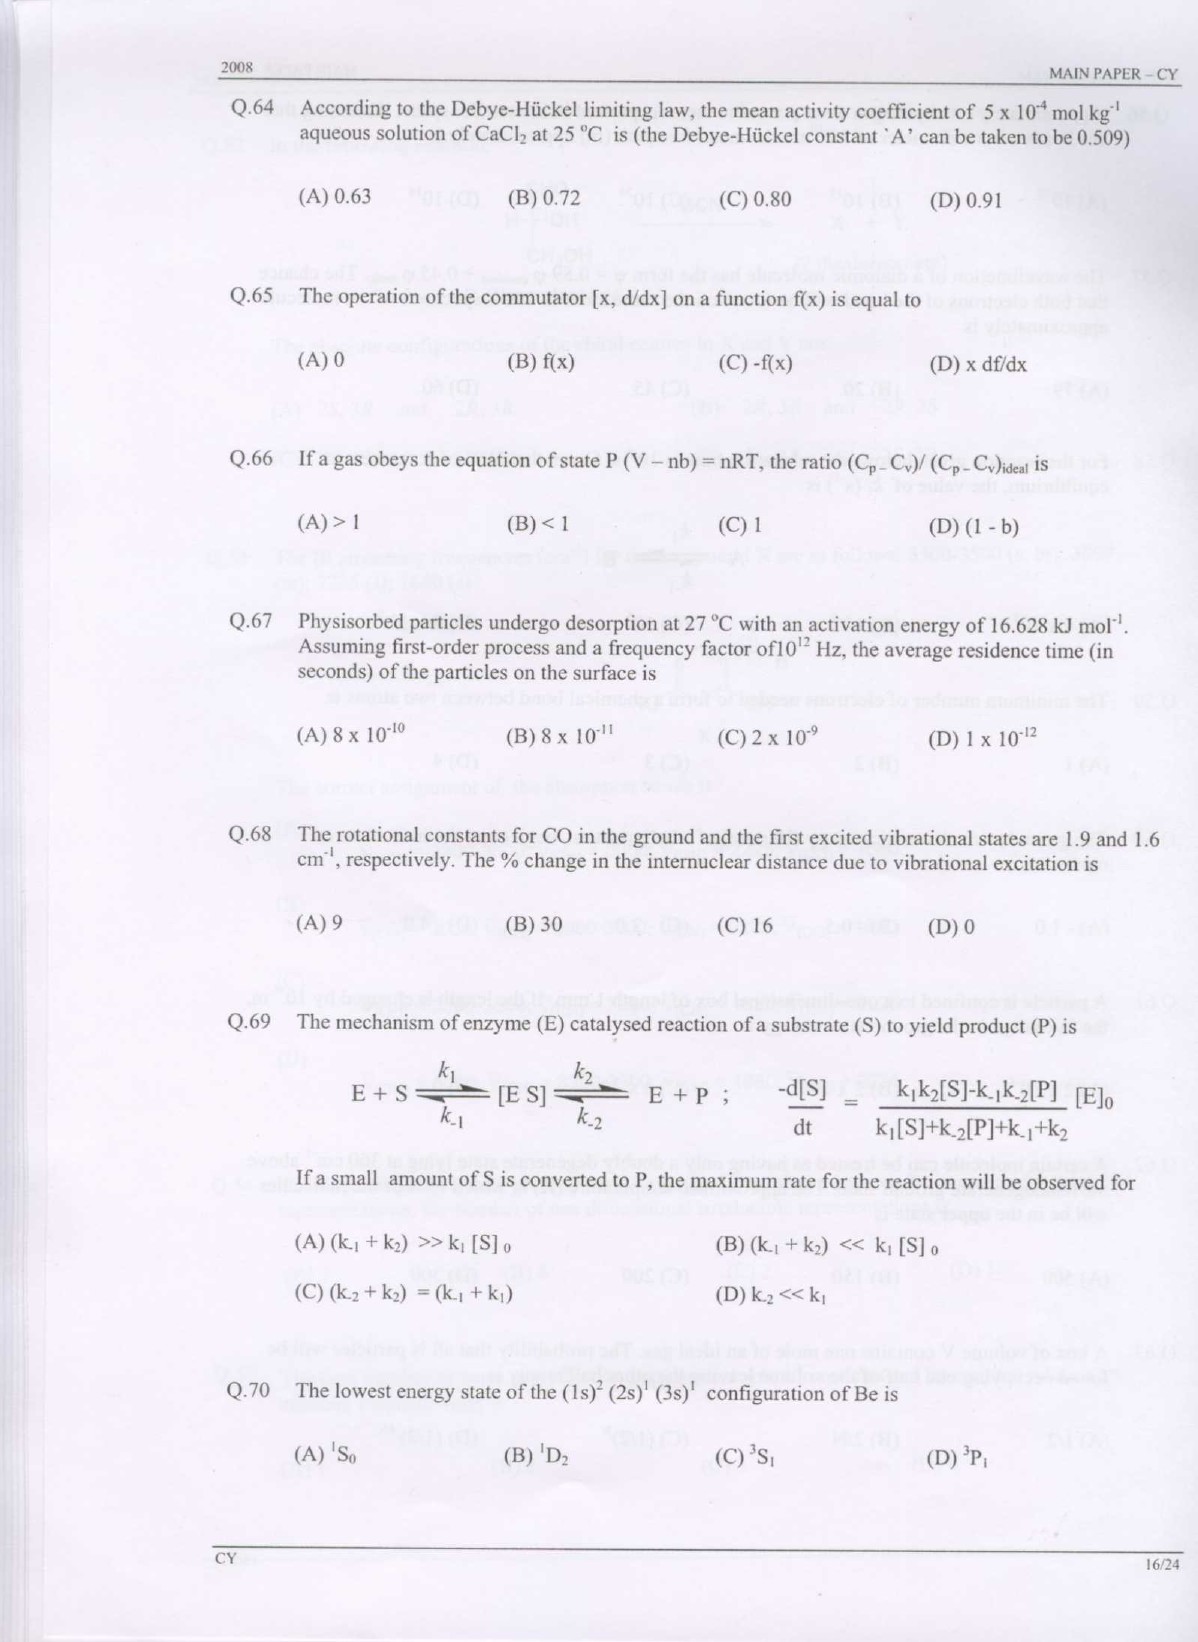 GATE Exam Question Paper 2008 Chemistry 16